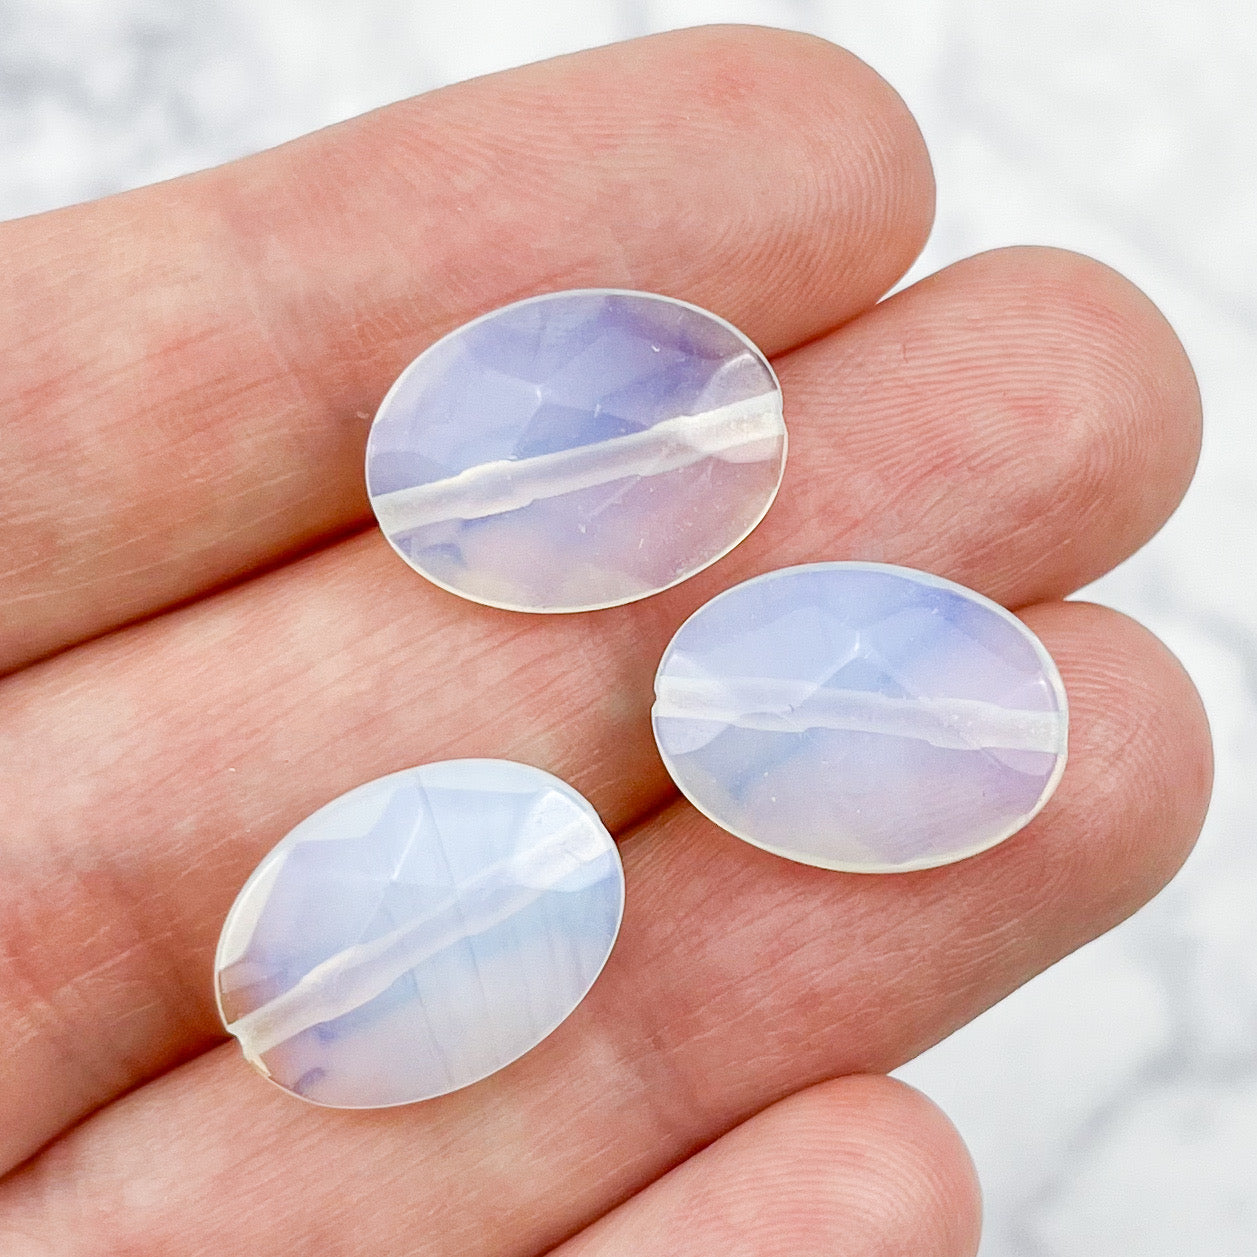 17mm x 13mm Opalite Faceted Clear & Aura Oval Bead Focal Bead Pack (3 Beads)